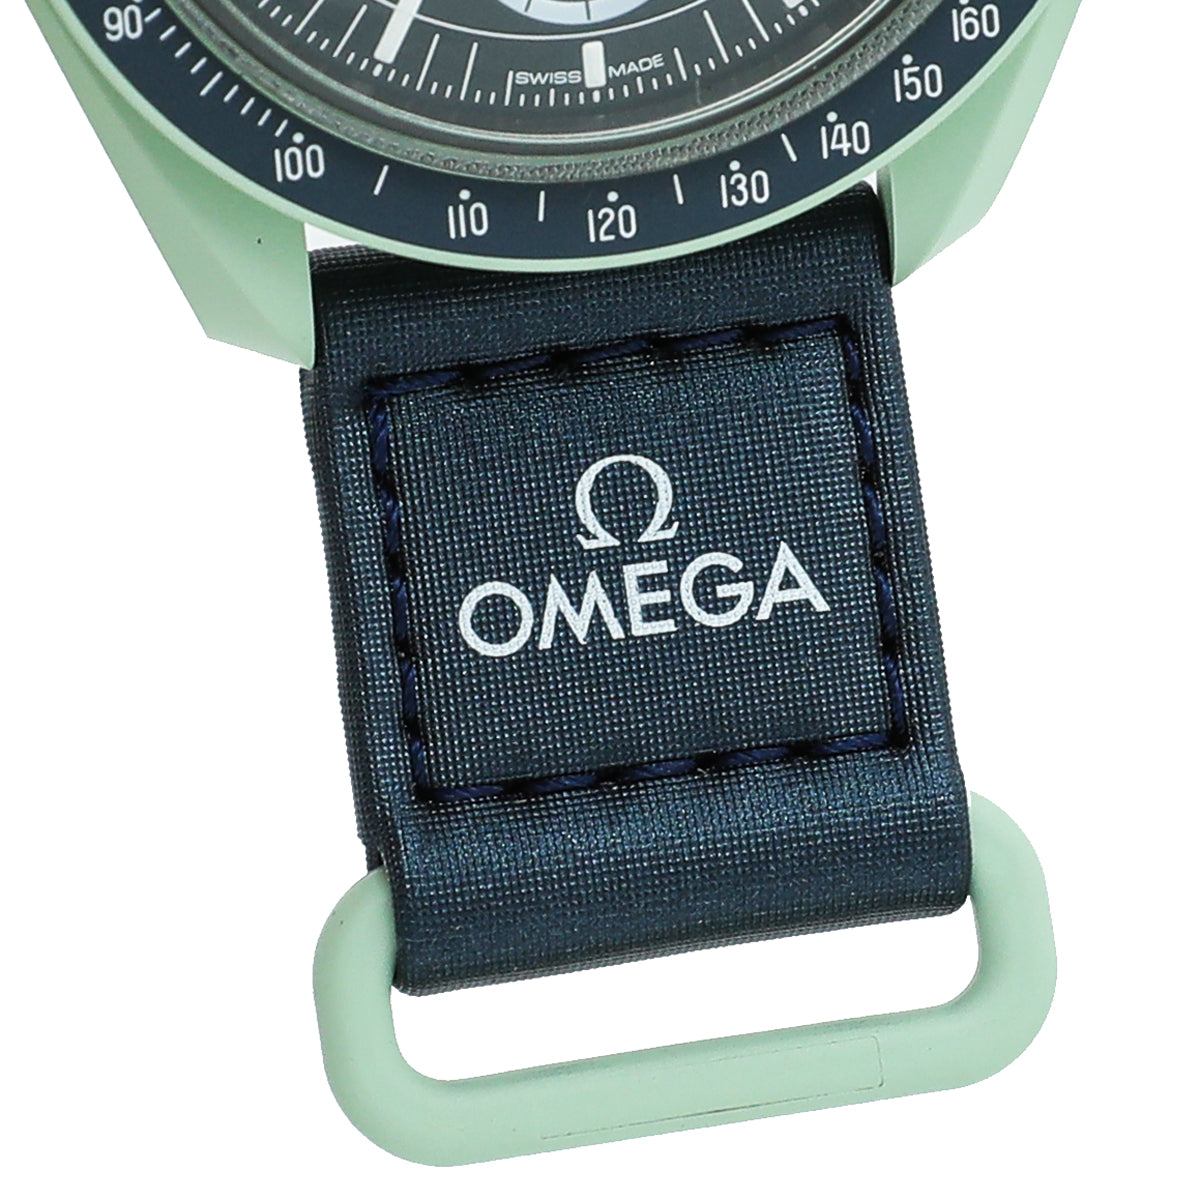 Omega Bicolor Swatch Speedmaster Moonswatch Mission On Earth 40mm Watch